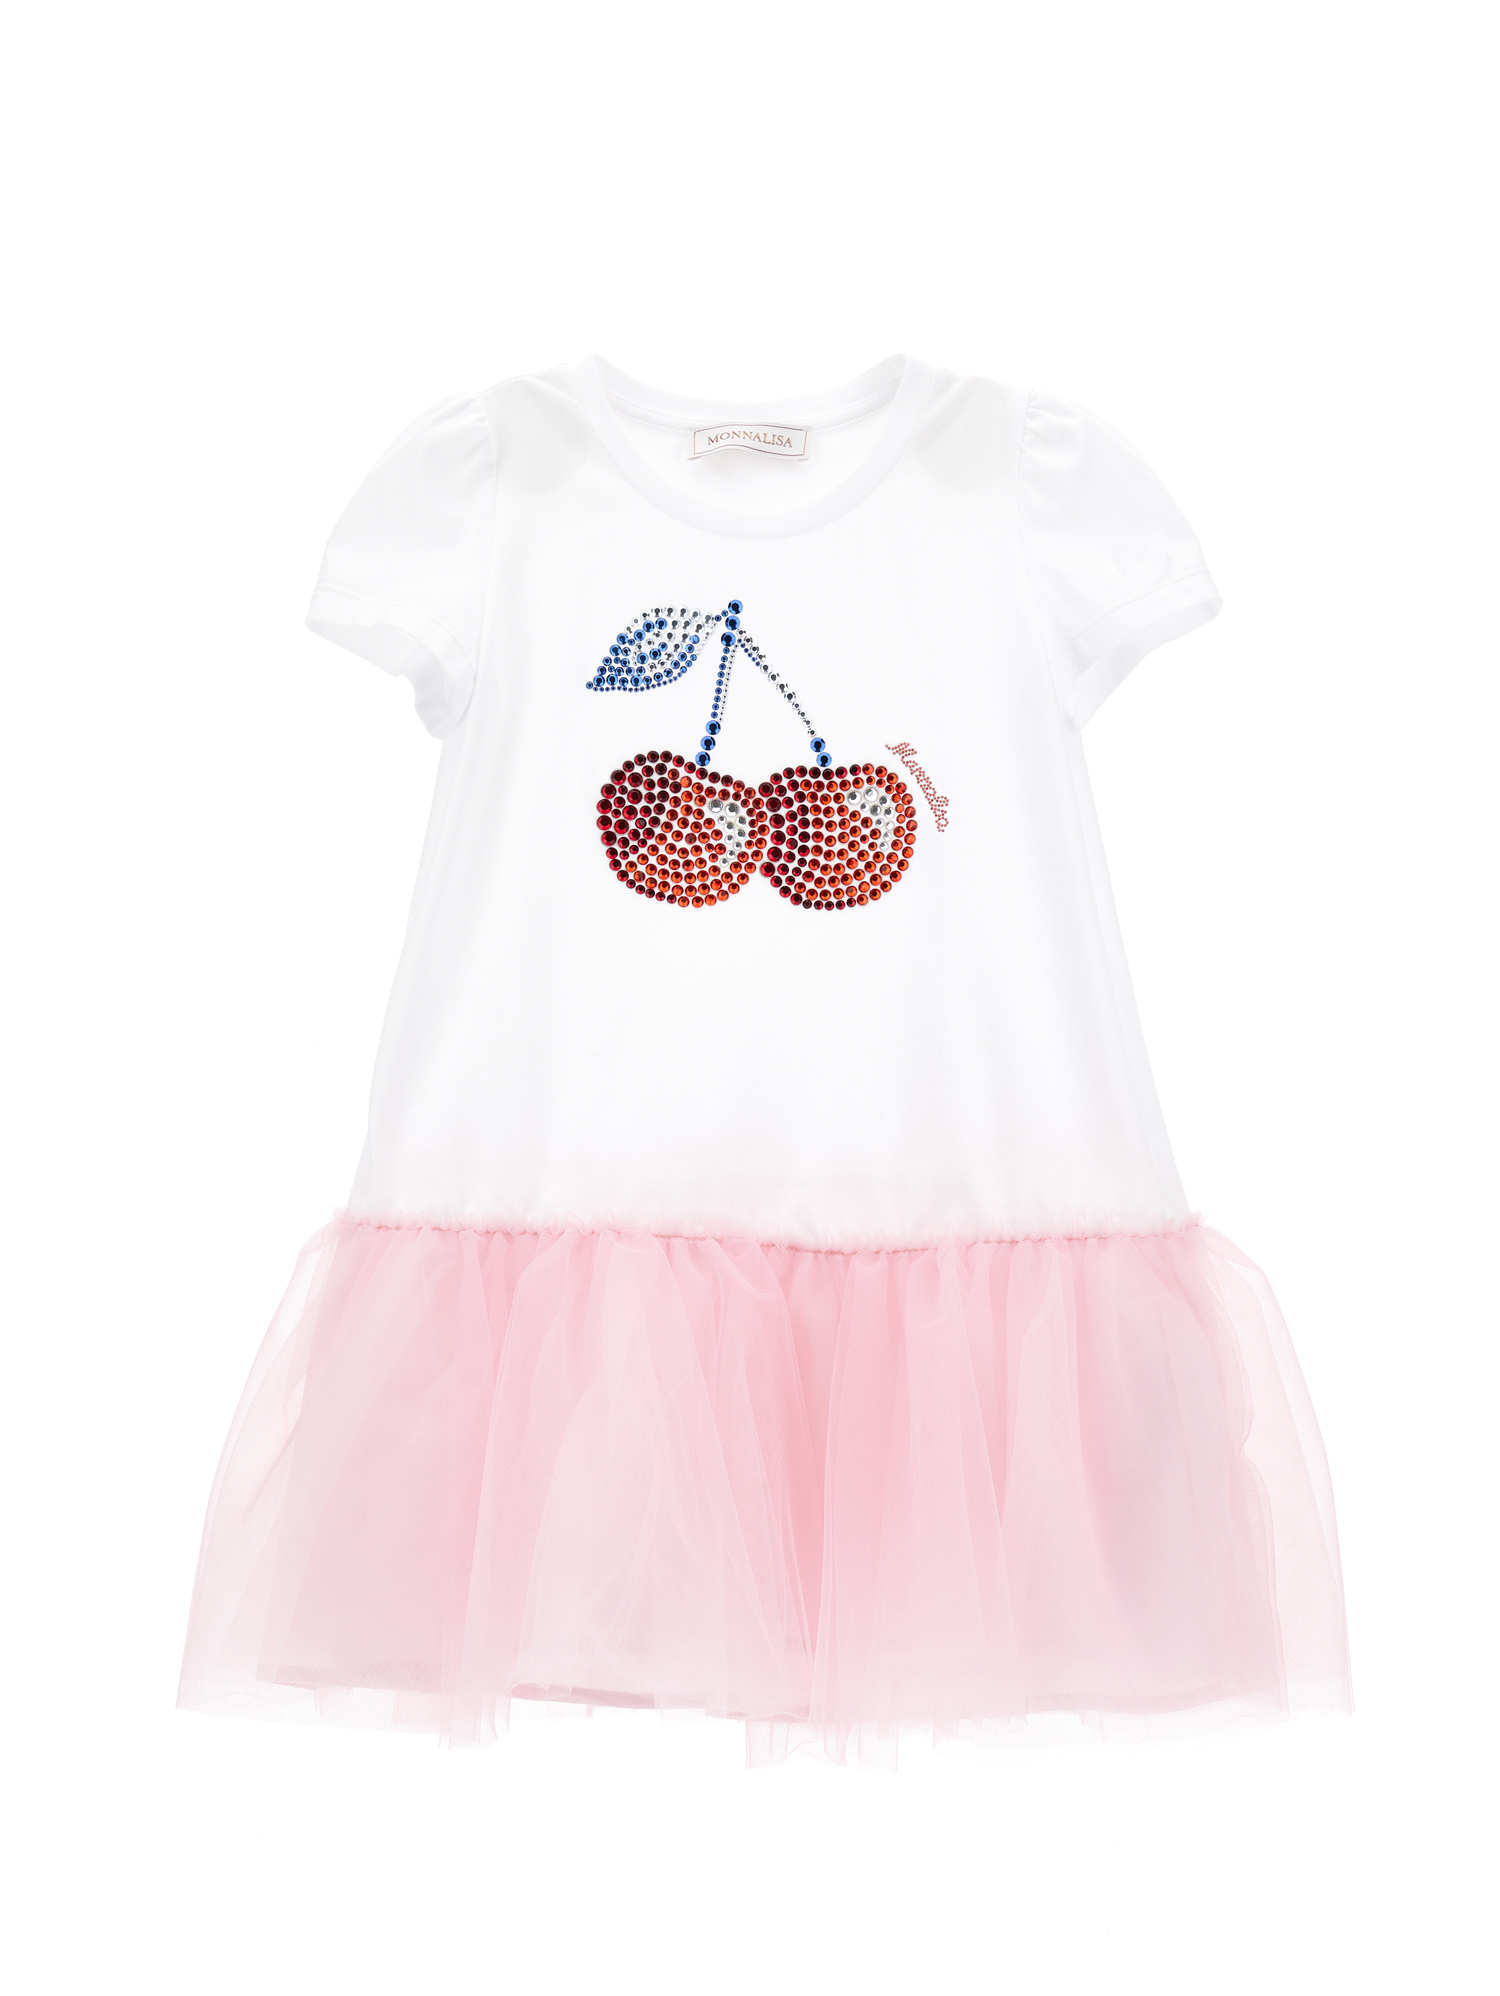 Monnalisa Babies'   Cotton Dress With Embroidered Cherries In White + Rosa Fairytale